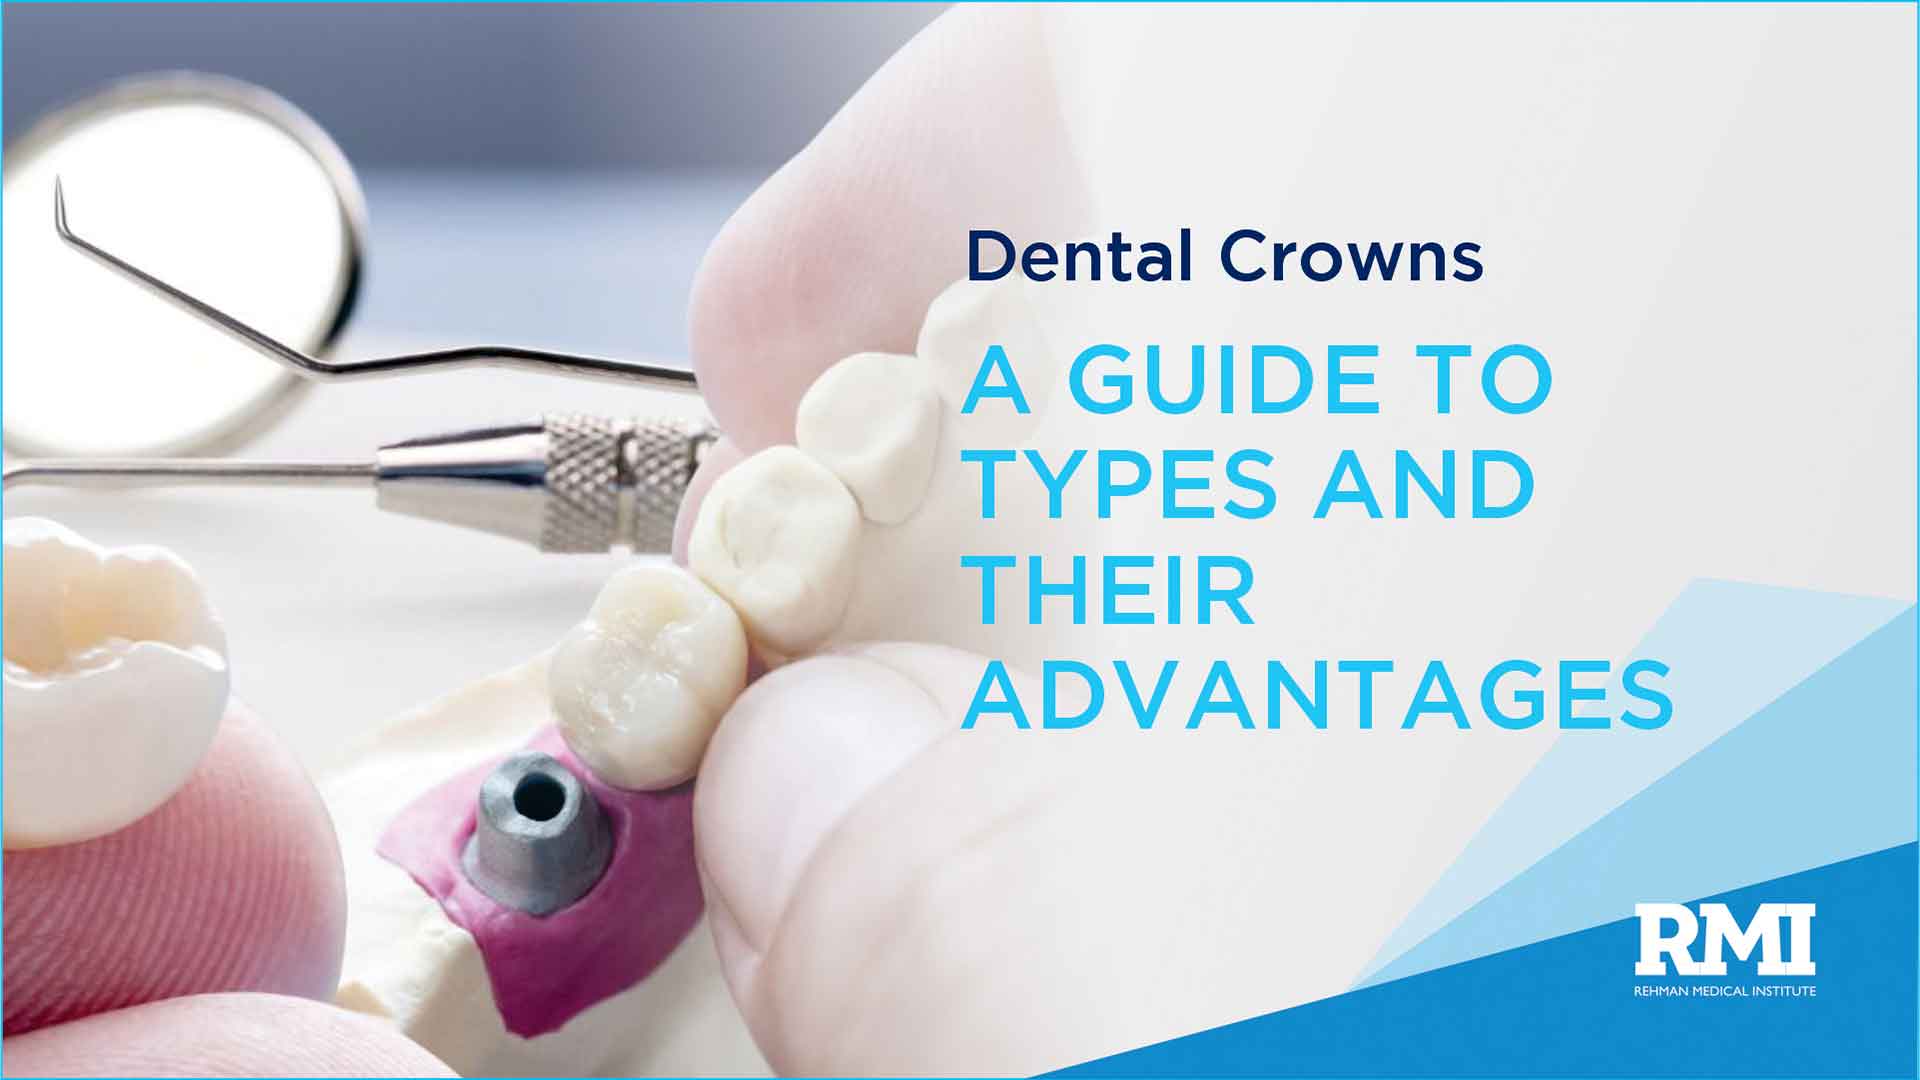 Dental Crowns: A Guide to Types and Their Advantages